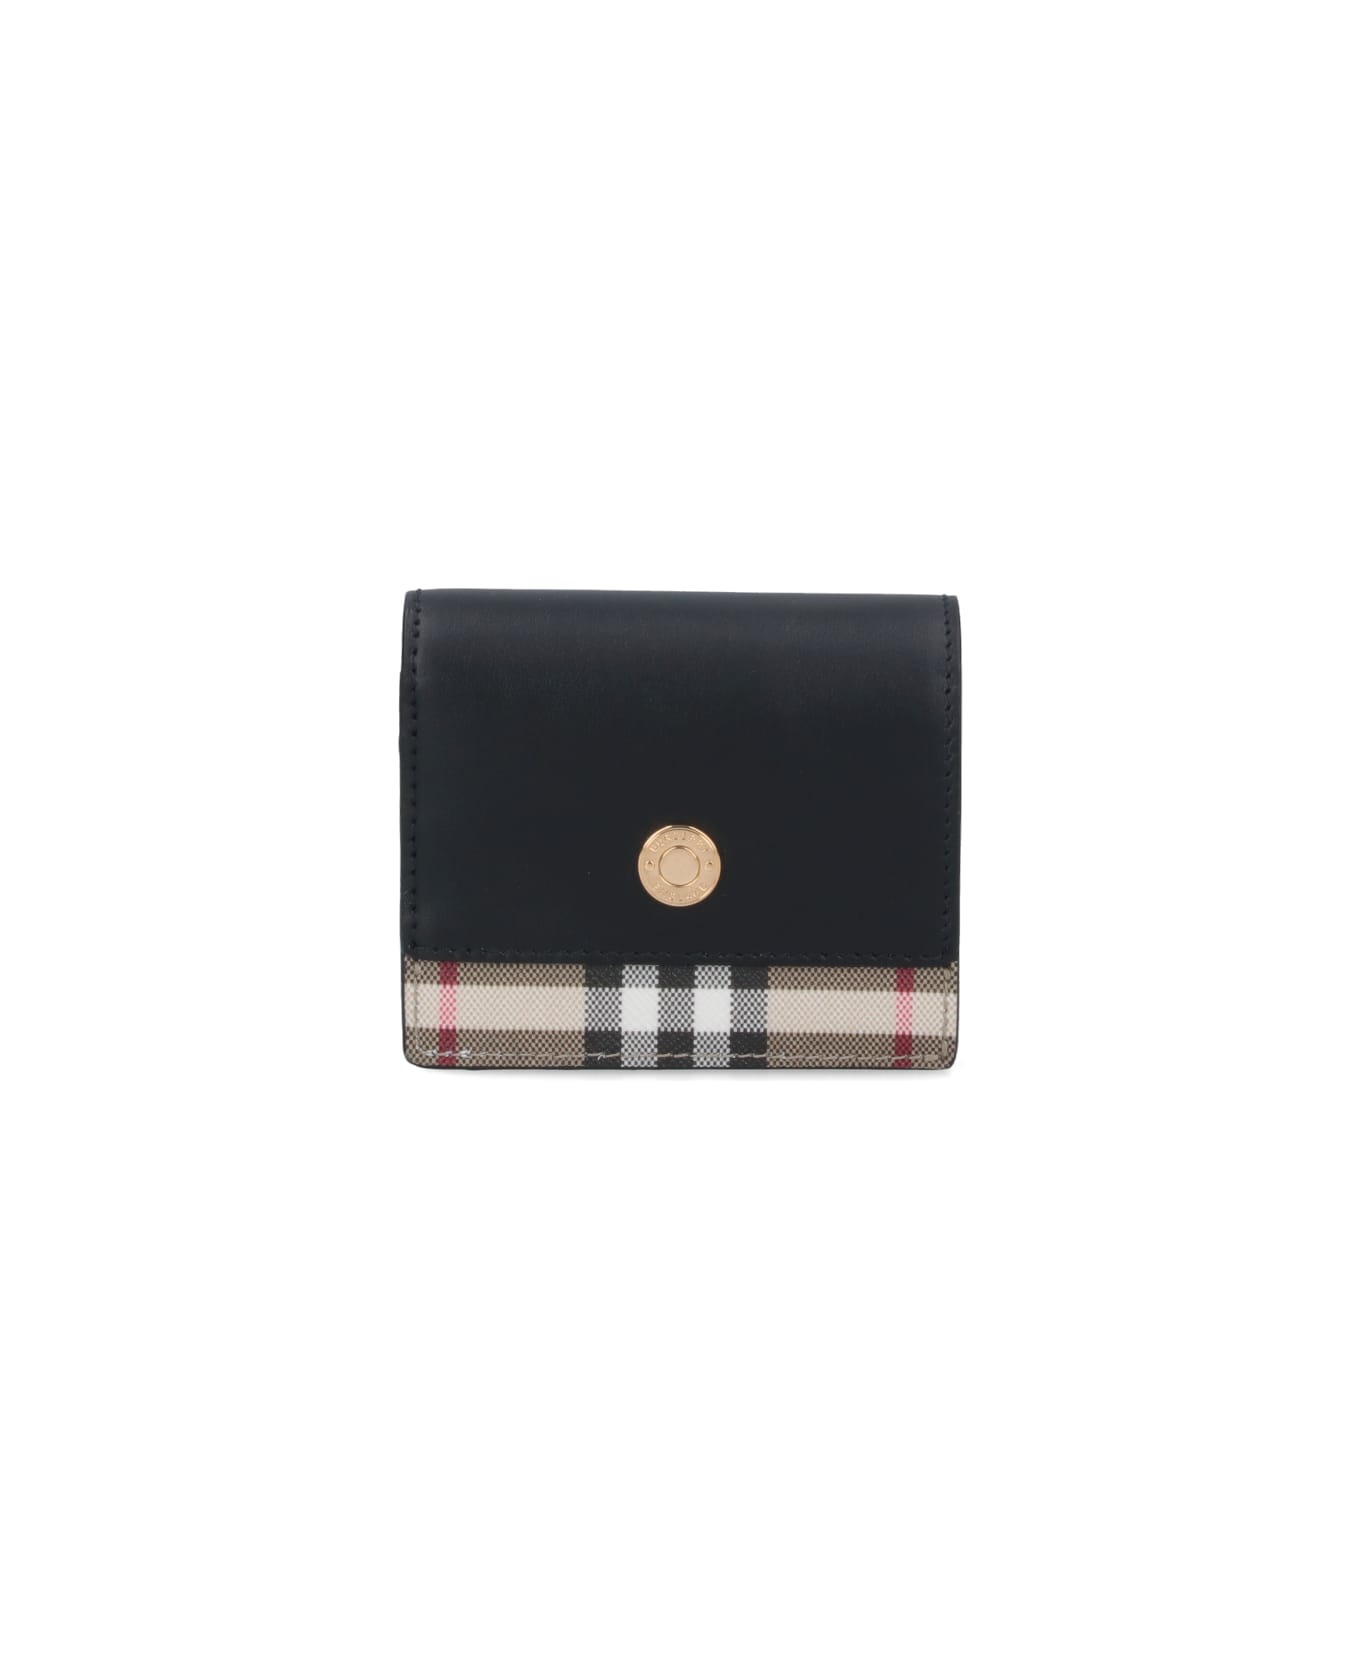 Burberry "check" Wallet - Black  